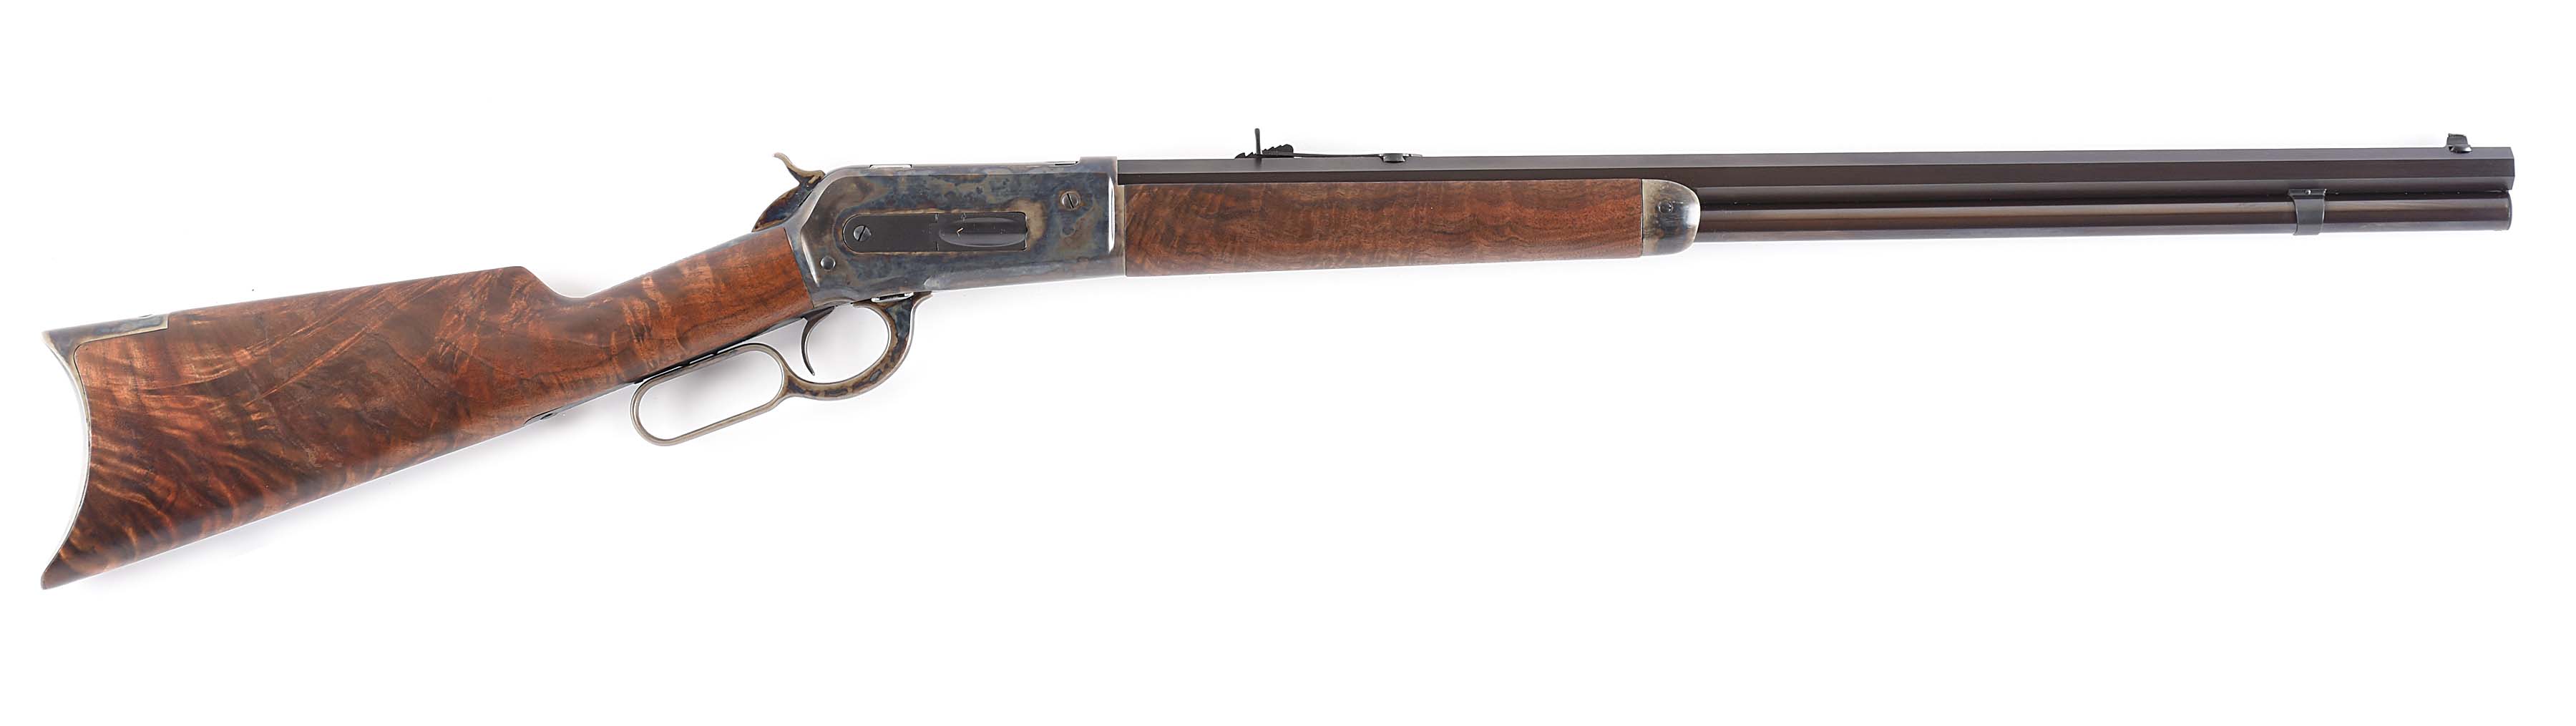 (C) winchester model 1886 .45-70 caliber lever action rifle (1918). 